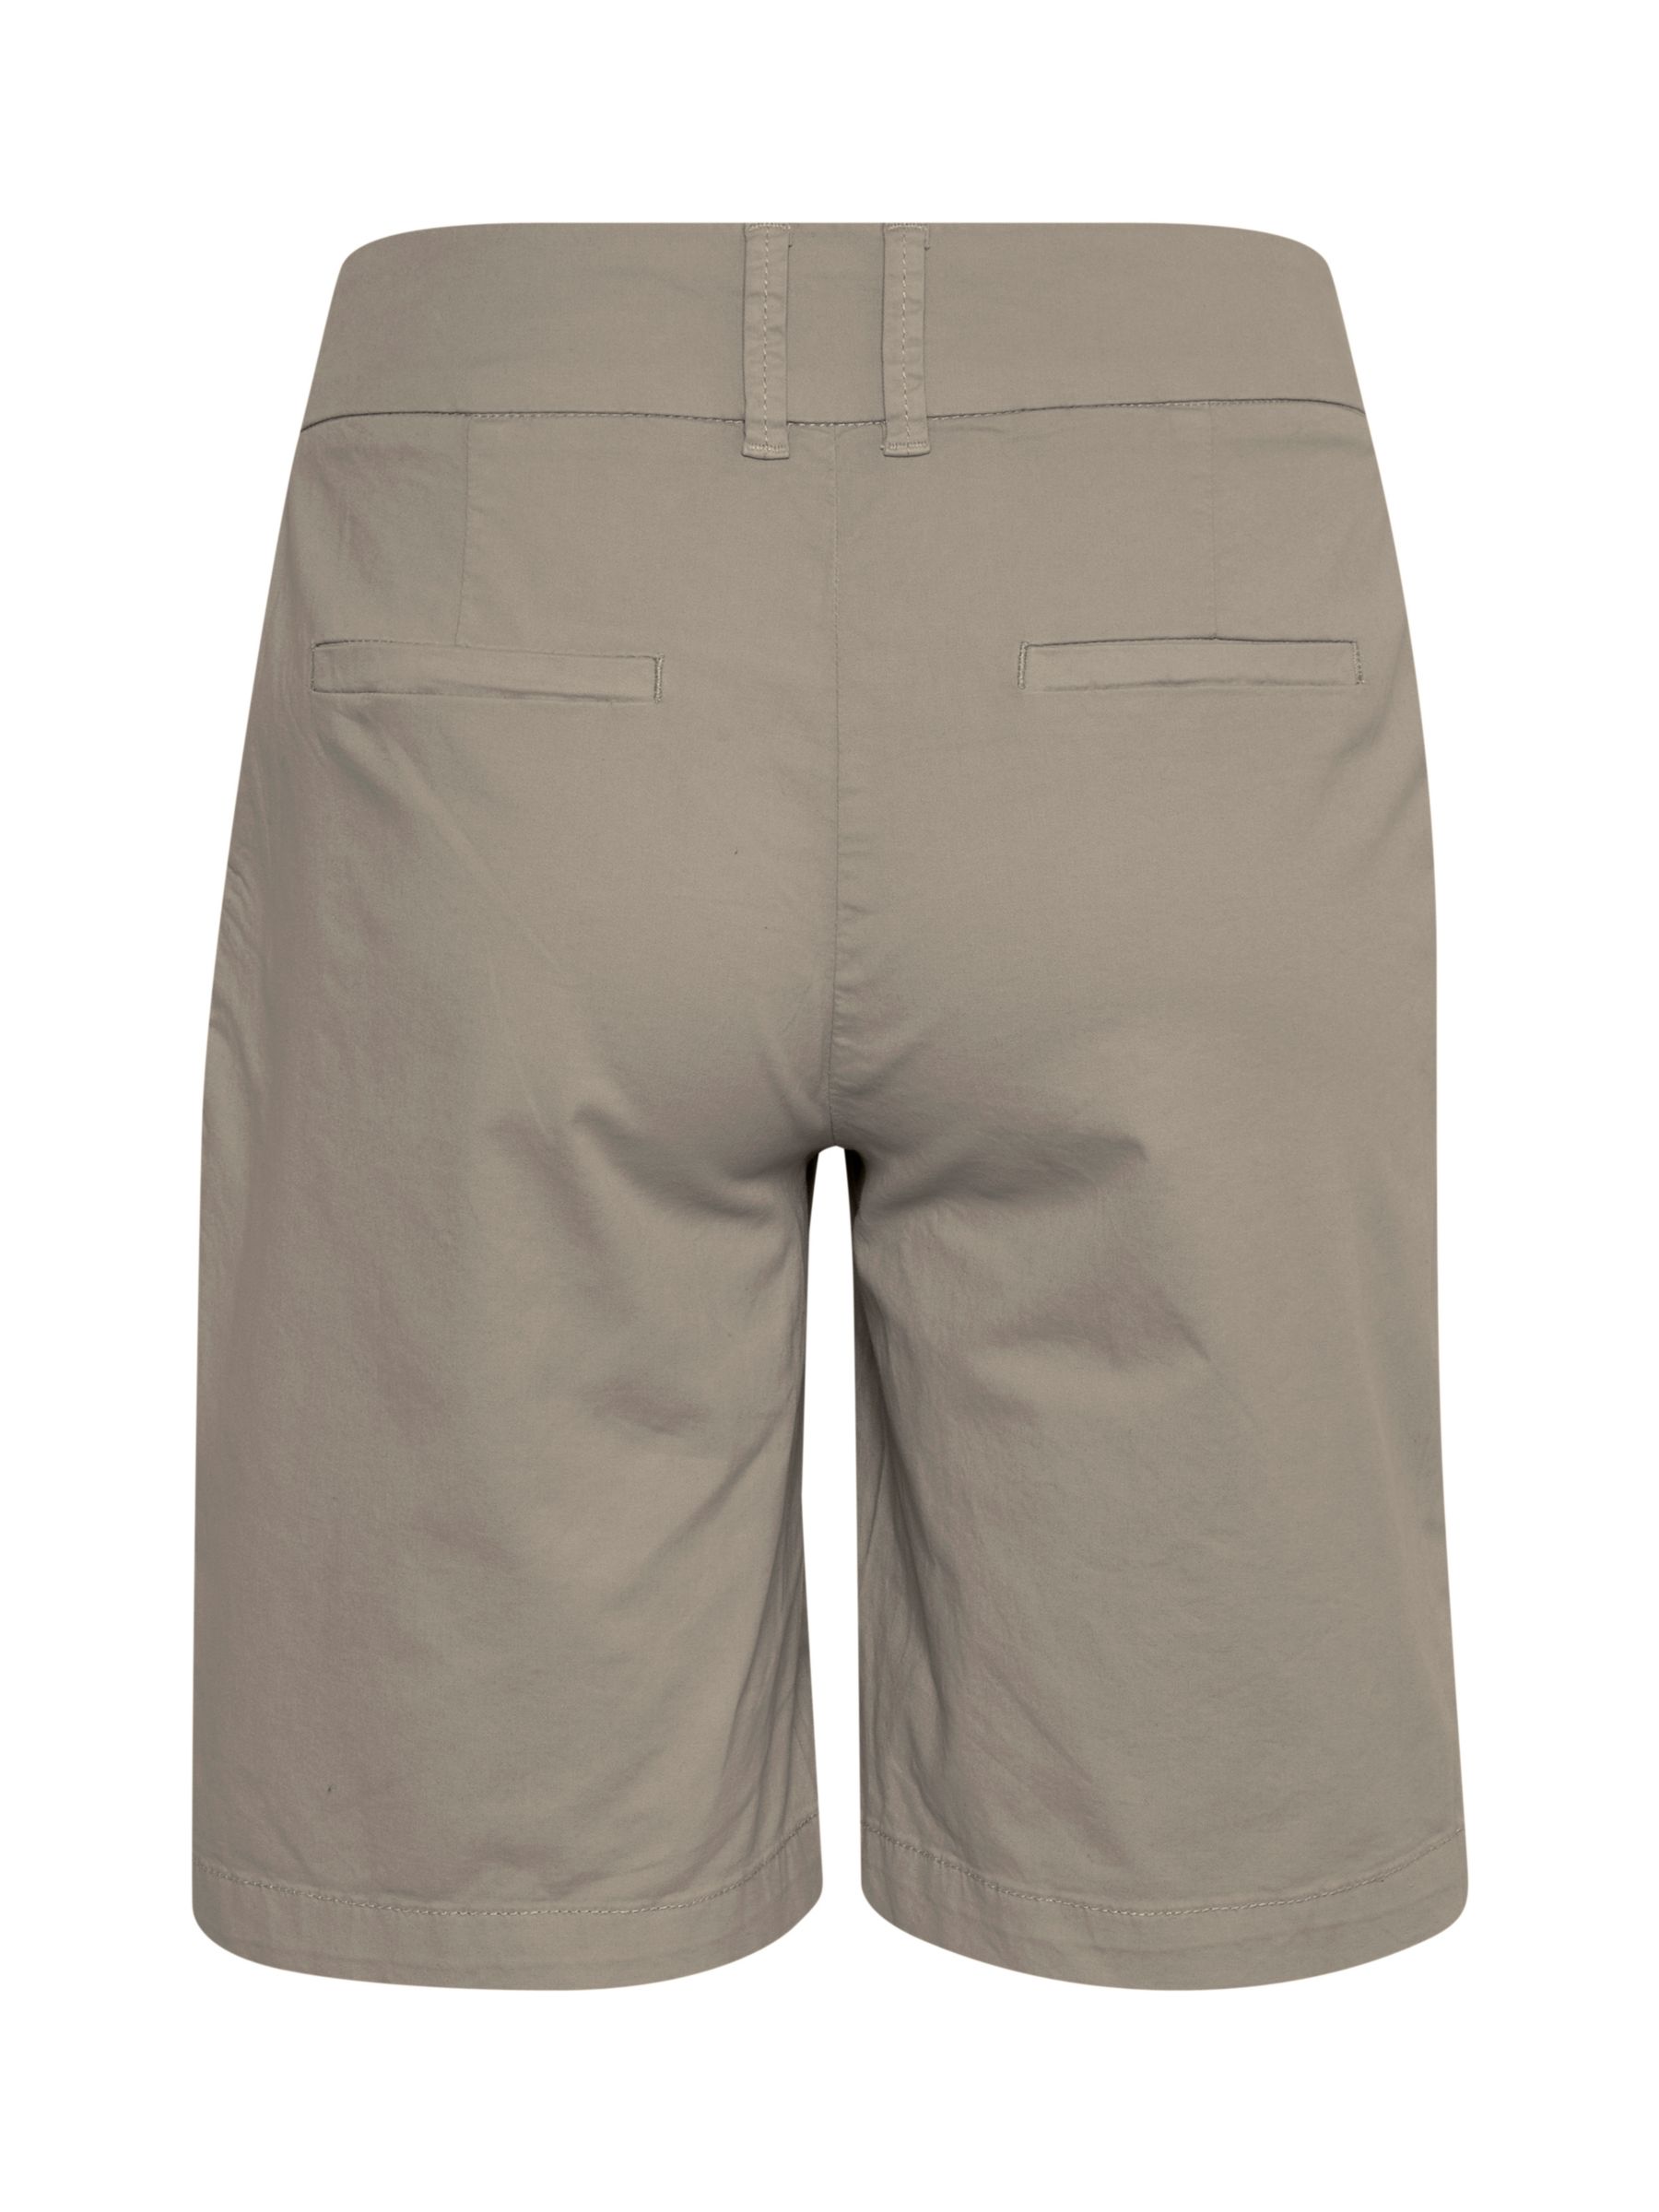 Buy Part Two Soffas Shorts Online at johnlewis.com